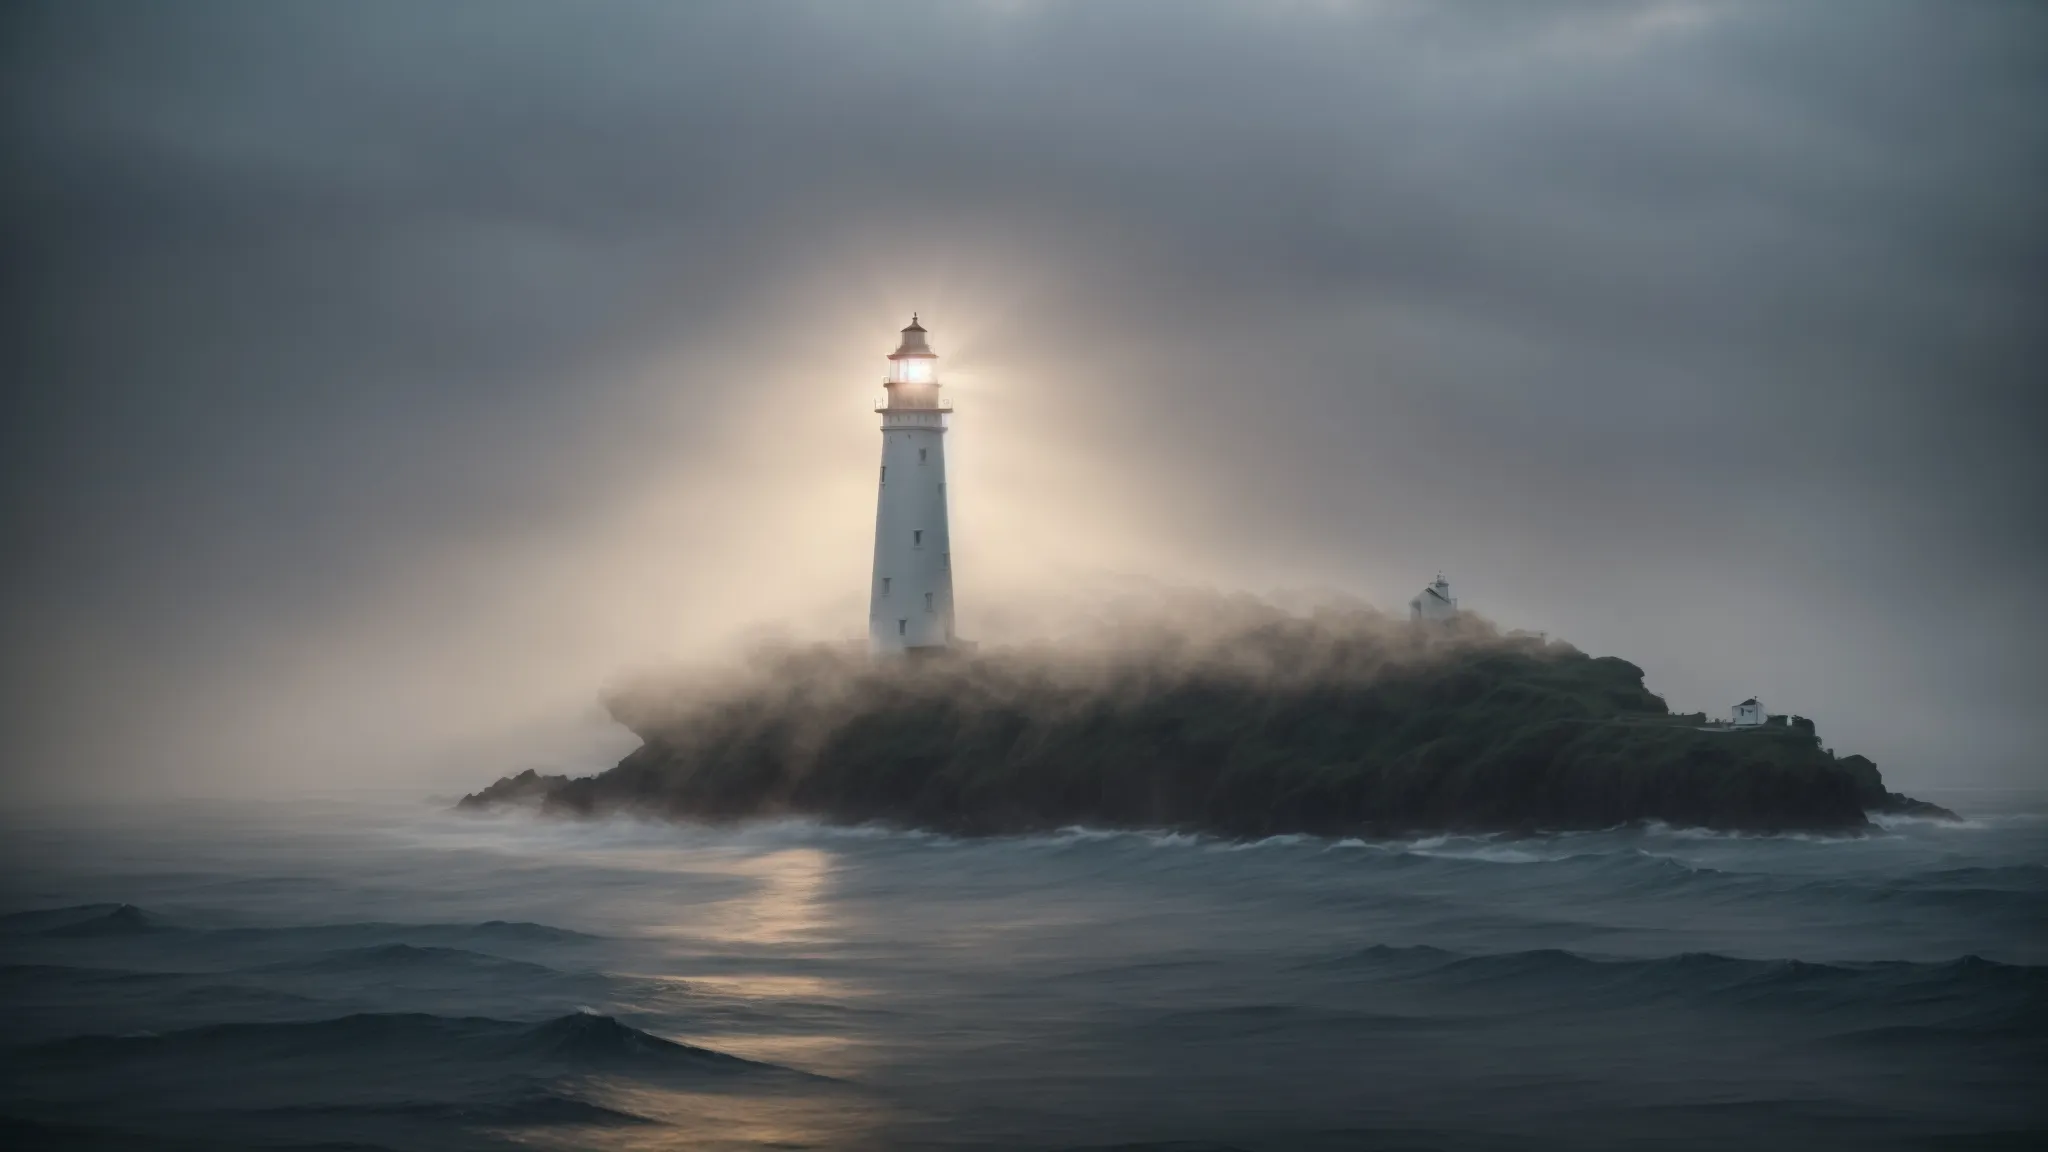 a towering lighthouse beams light through a dense fog at twilight, standing as a solitary guide for navigating the tempestuous sea.